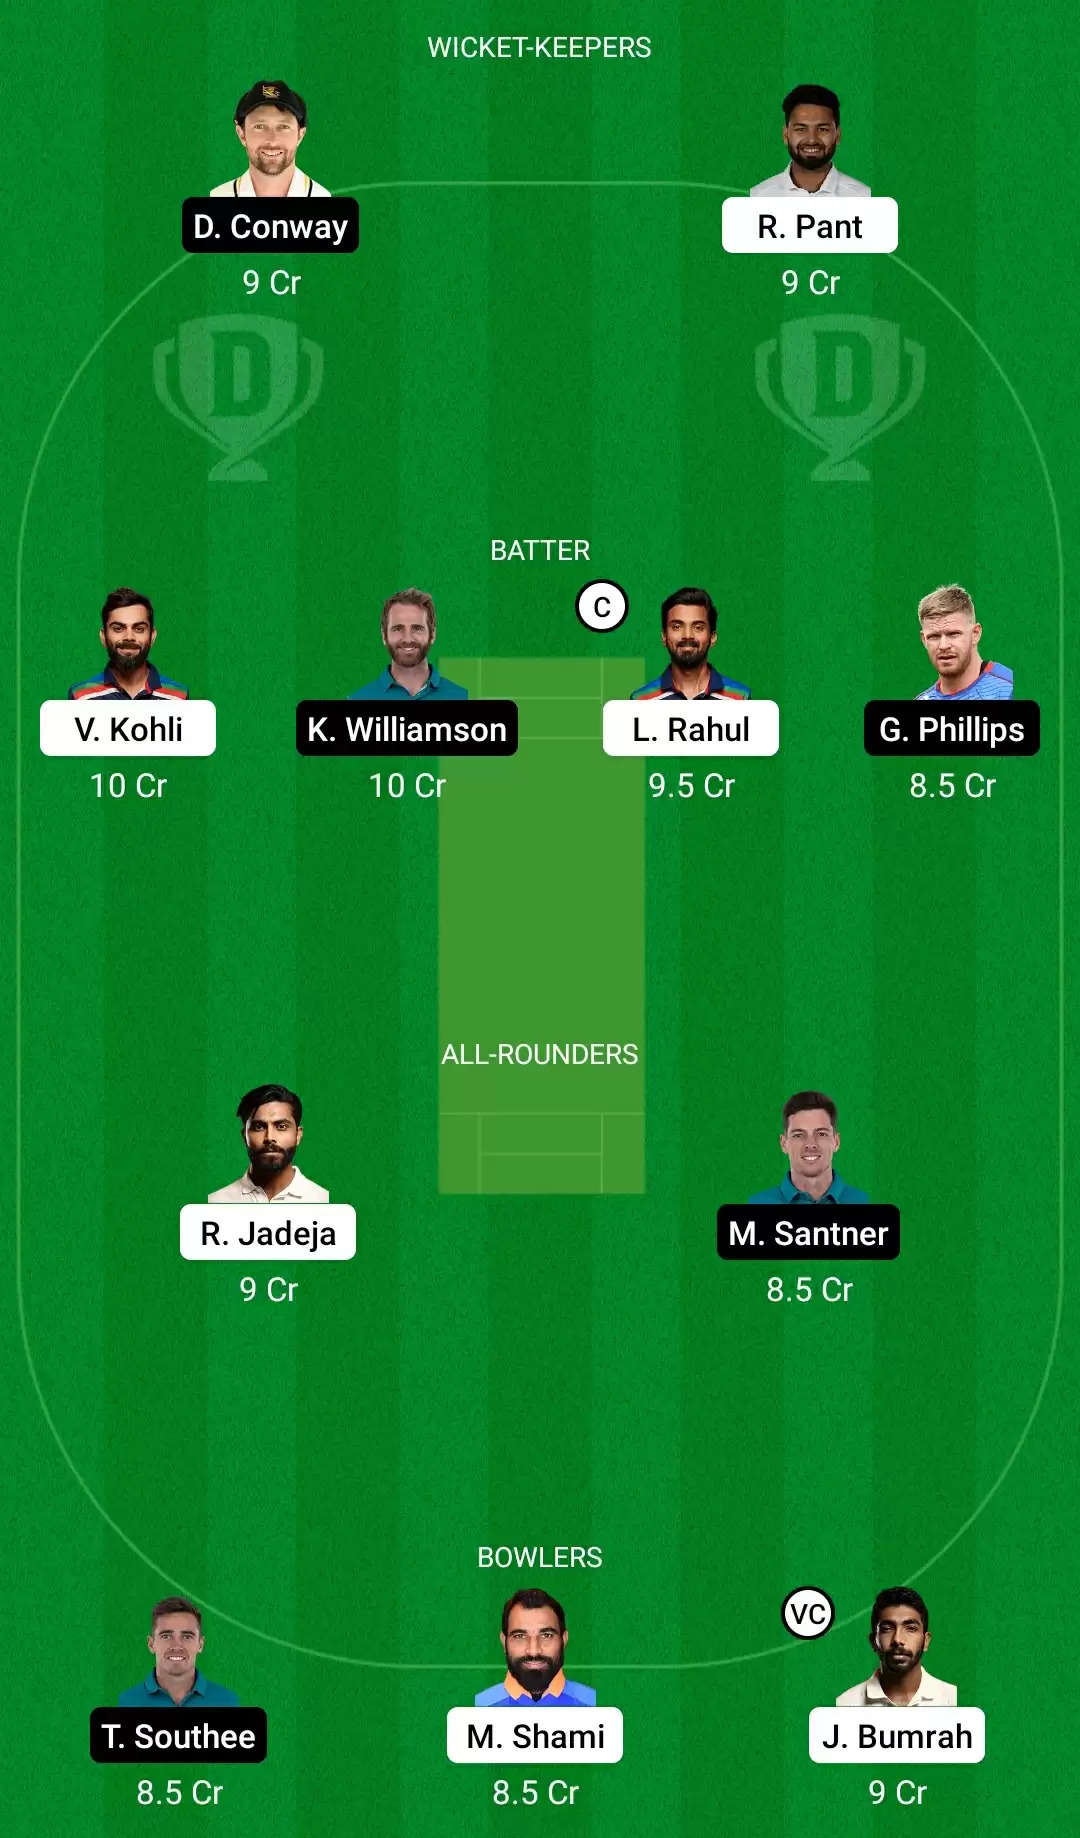 IND vs NZ Dream11 Prediction for T20 World Cup 2021: Playing XI, Fantasy Cricket Tips, Team, Weather Updates and Pitch Report